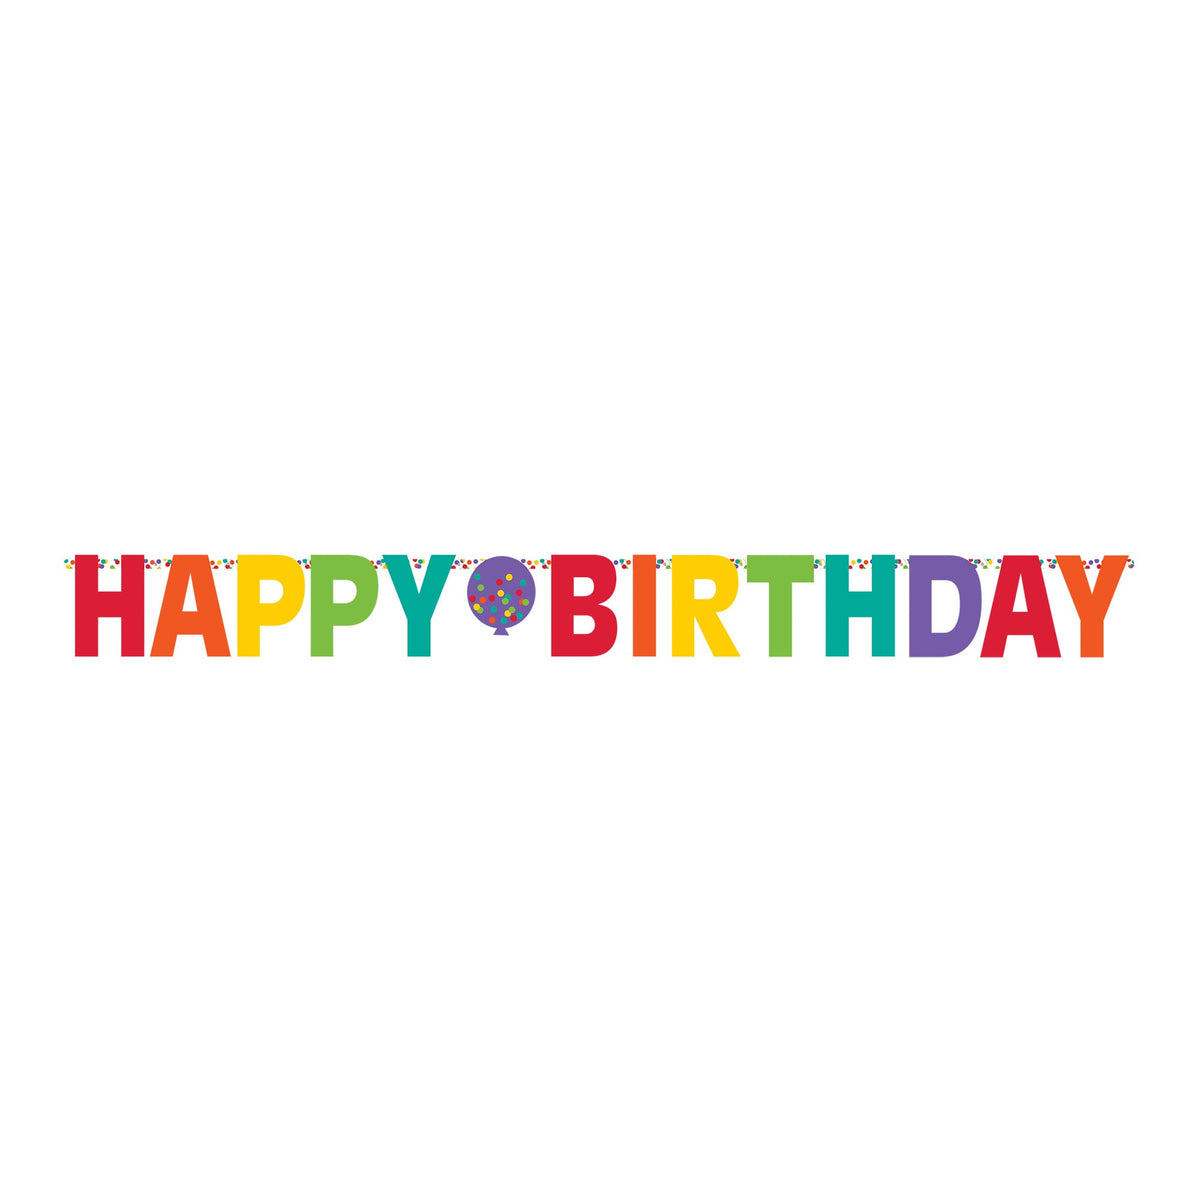 Rainbow Colored 10 4/5" x 12 1/2" Letter Birthday Banner